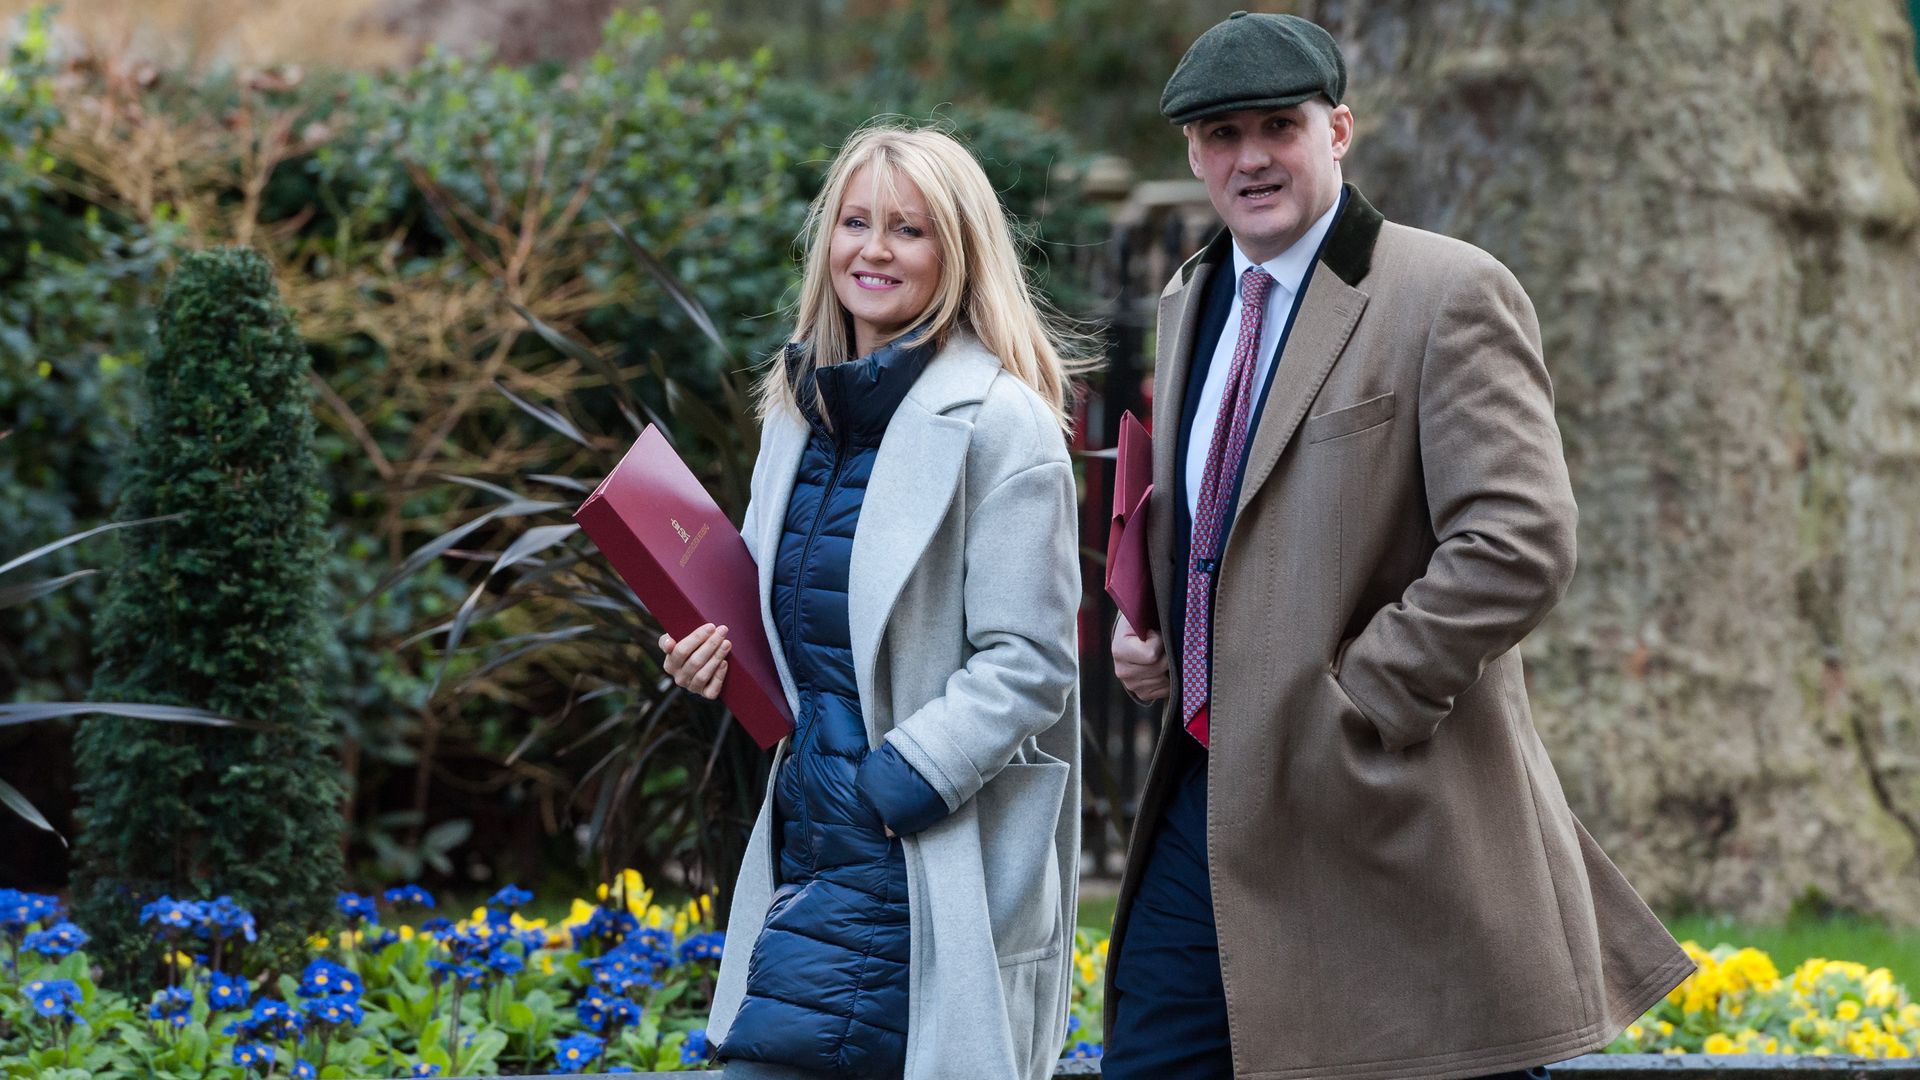 Minister of State for Housing Esther McVey (L) and Minister of State (Minister for the Northern Powerhouse and Local Growth) Jake Berry (R) arrive in Downing Street in central London to attend a Cabinet meeting - Credit: NurPhoto via Getty Images